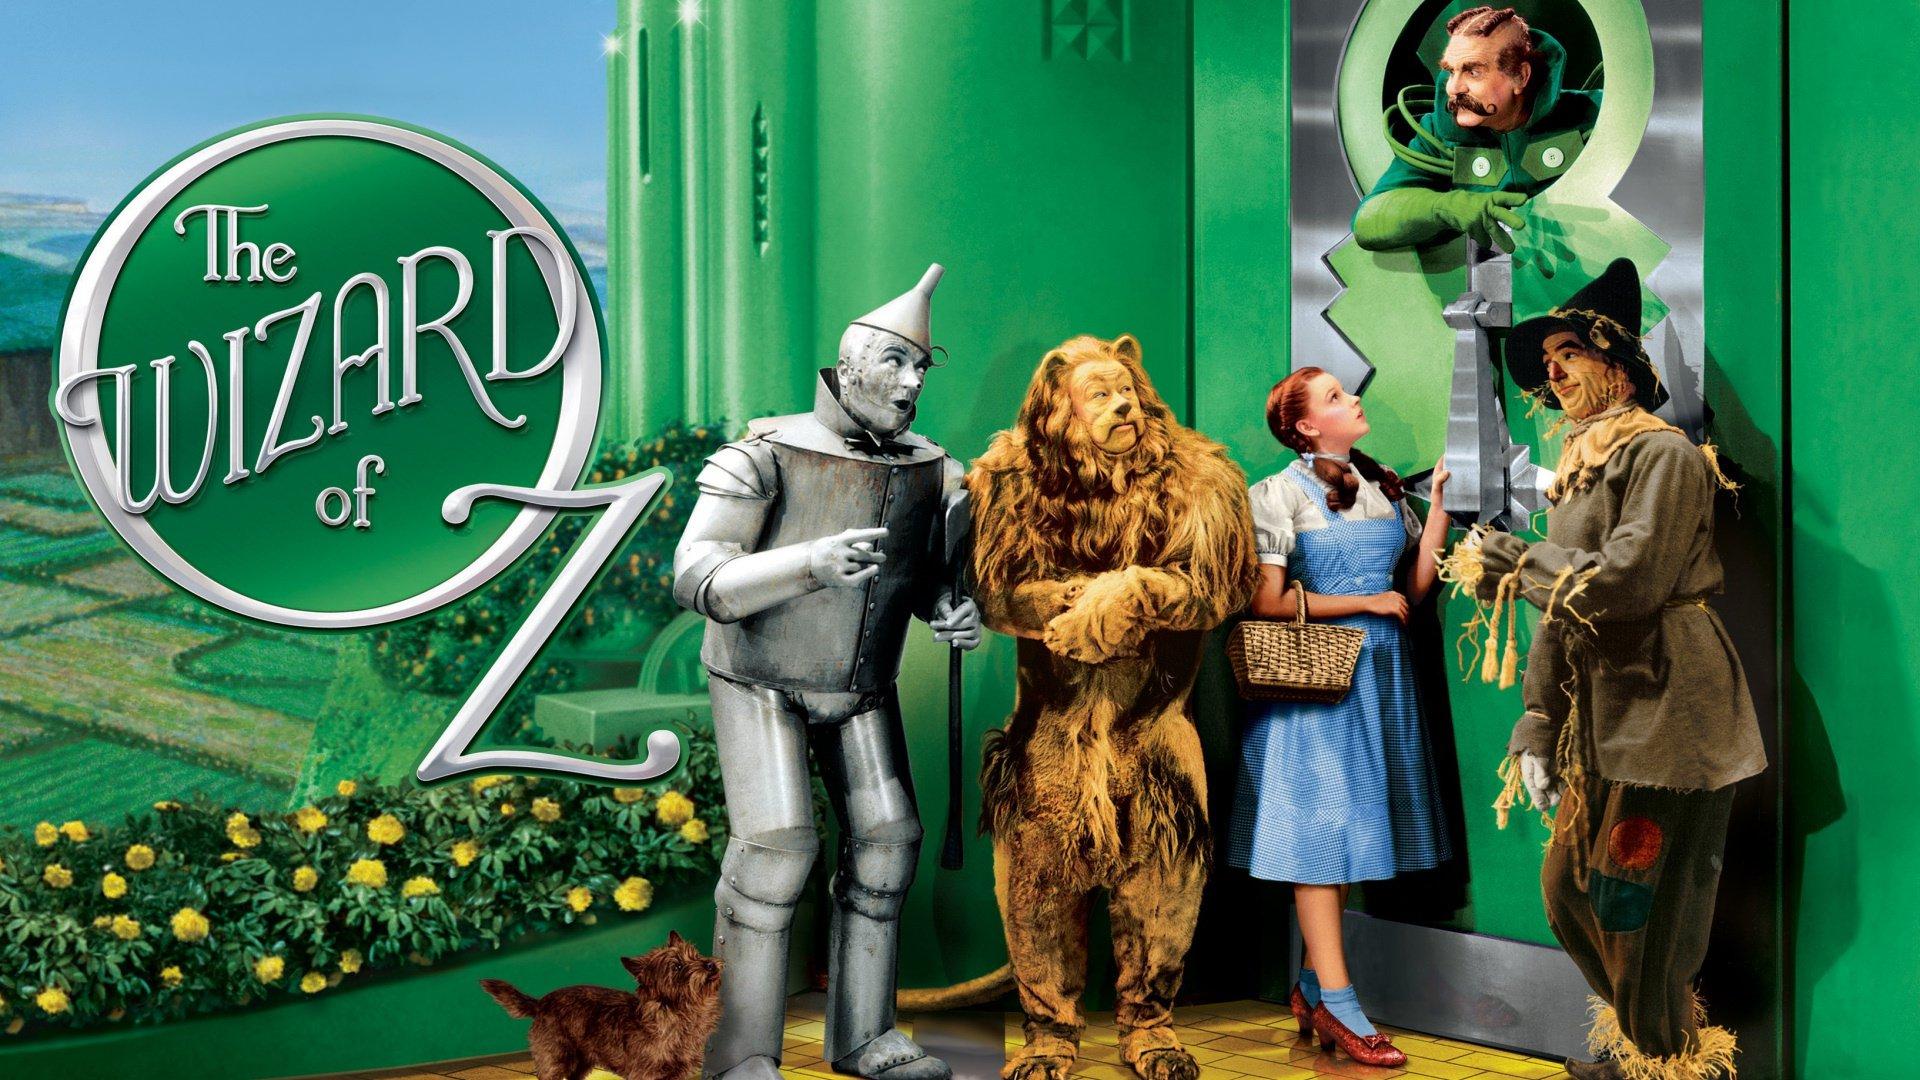 The Wizard of Oz (1939)_RESCHEDULED_New Date TBA